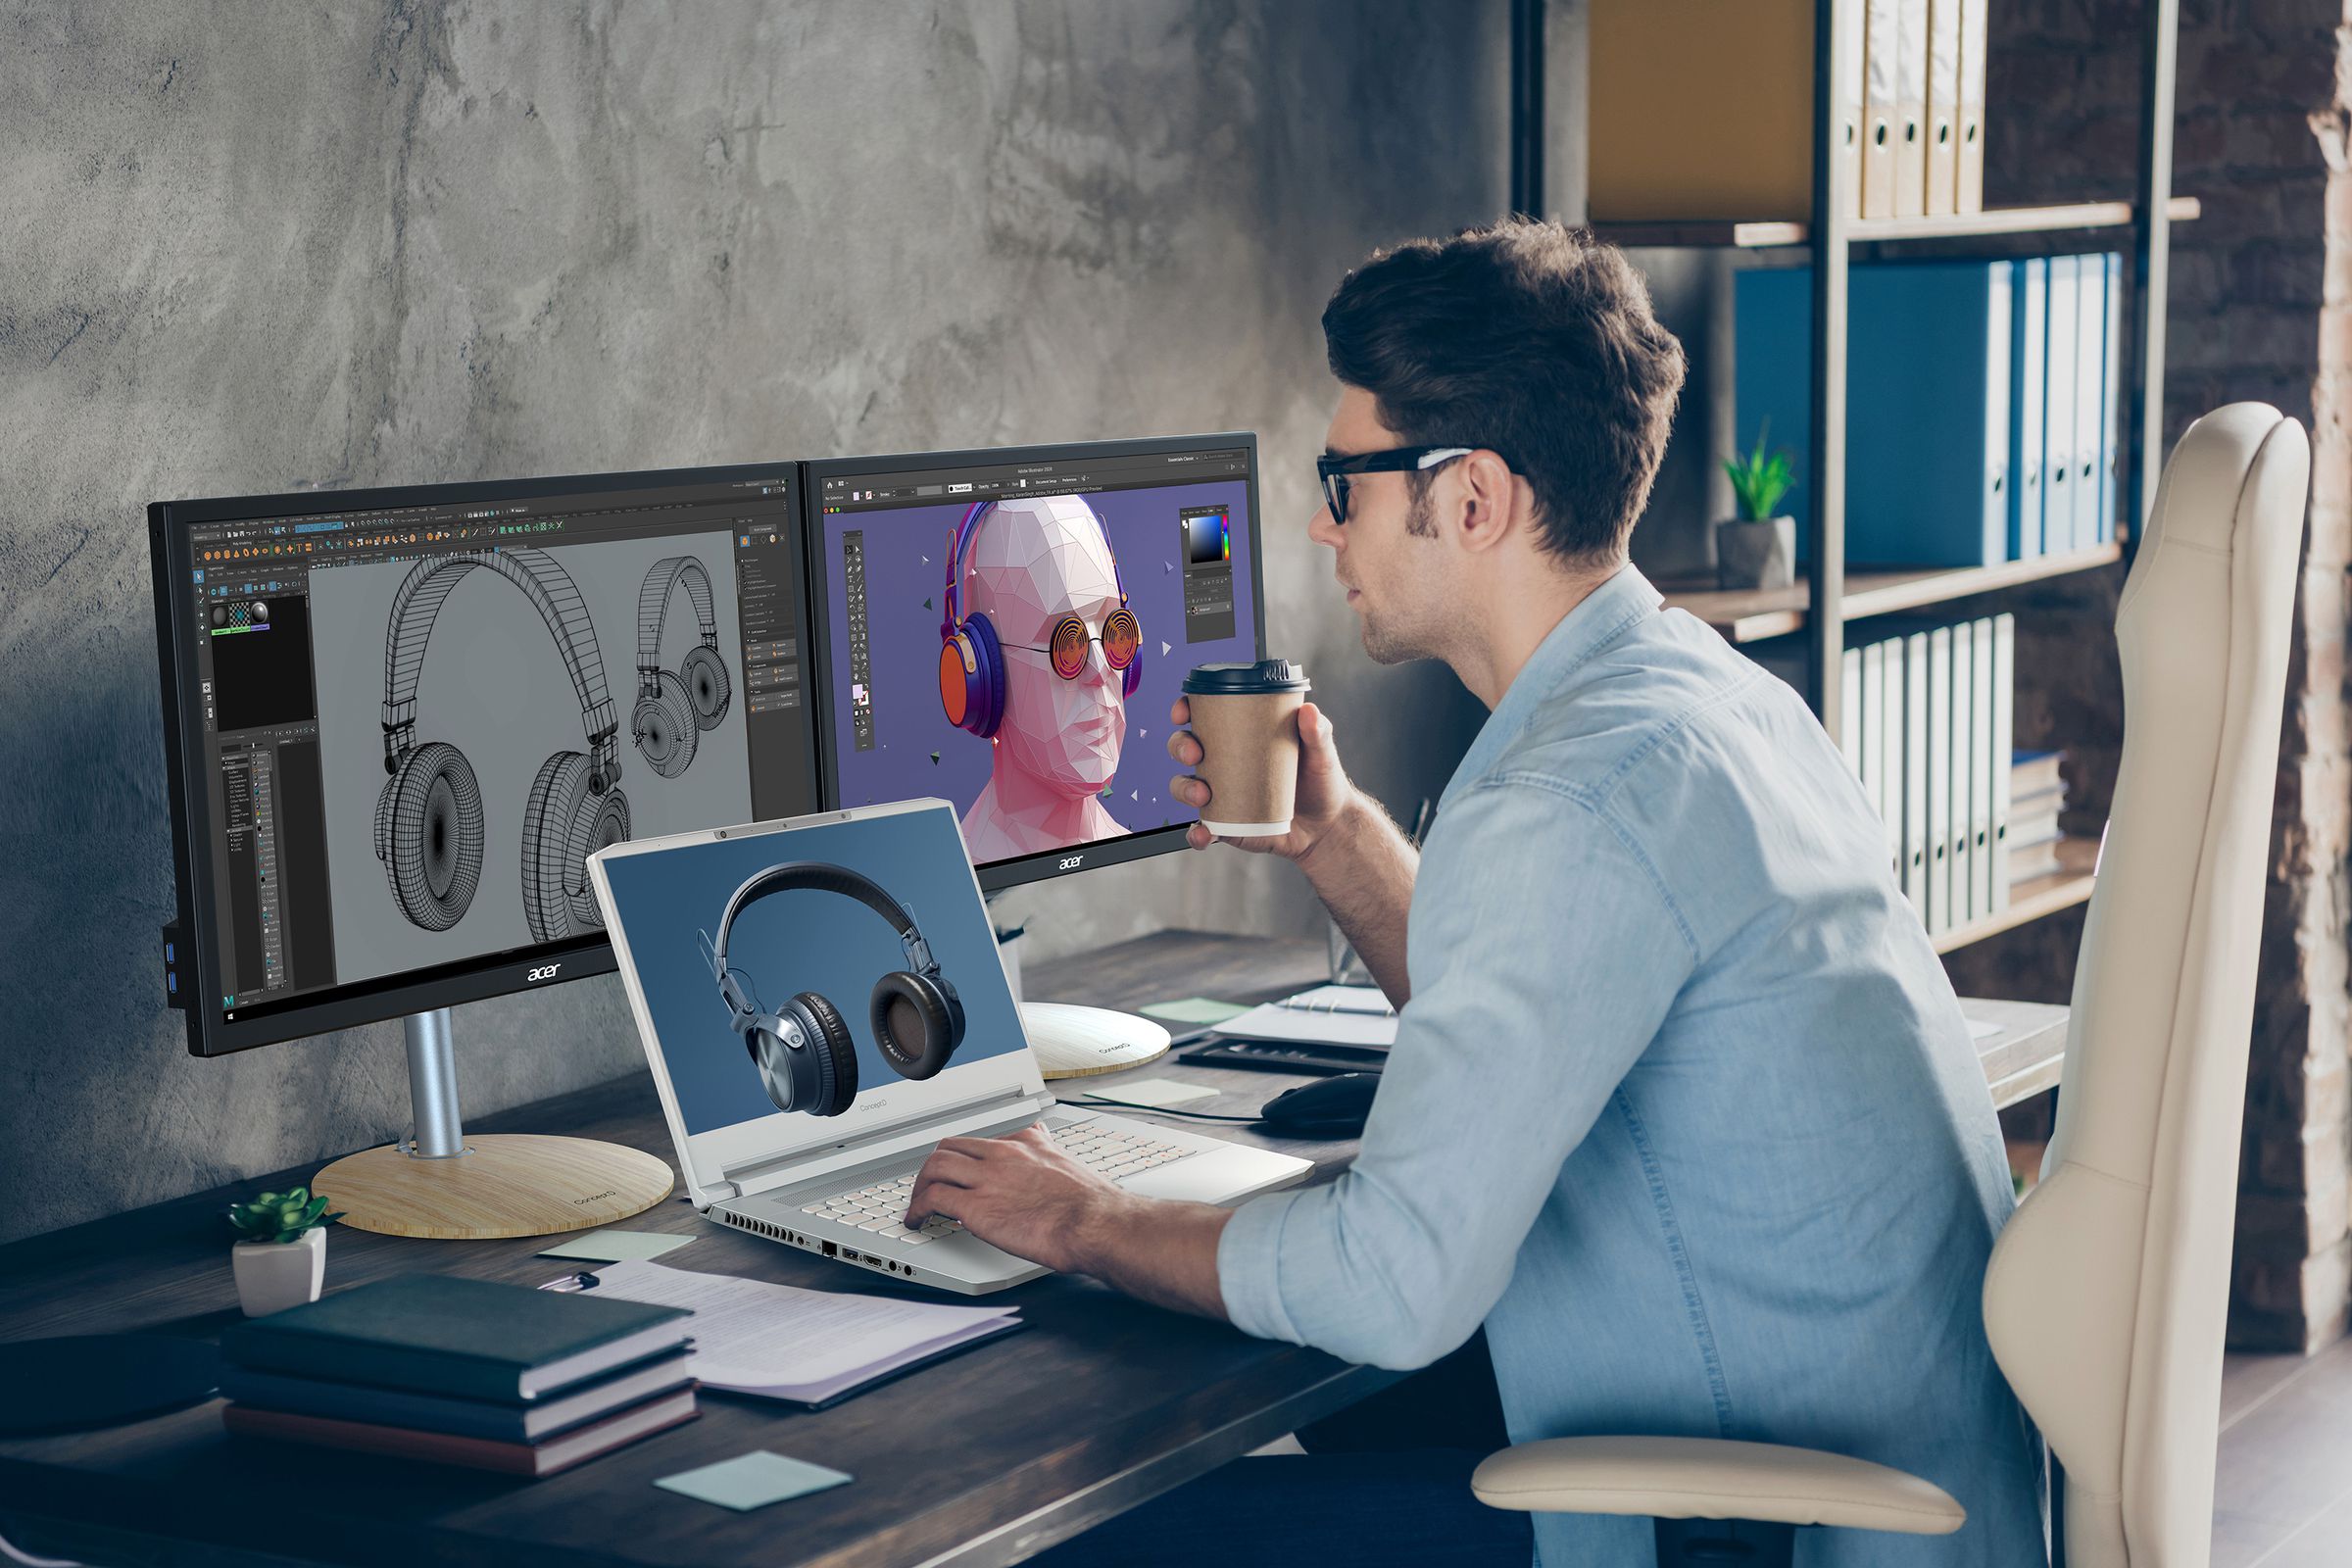 A user views a 3D model of black headphones on a white ConceptD notebook with a blue background. To its left is a pile of three notebooks, a notepad, and a small potted plant. The user holds a coffee in their right hand. Behind the notebook are two external monitors where the user edits a 2D version of the image in editing software. To the right of the desk is a bookshelf.